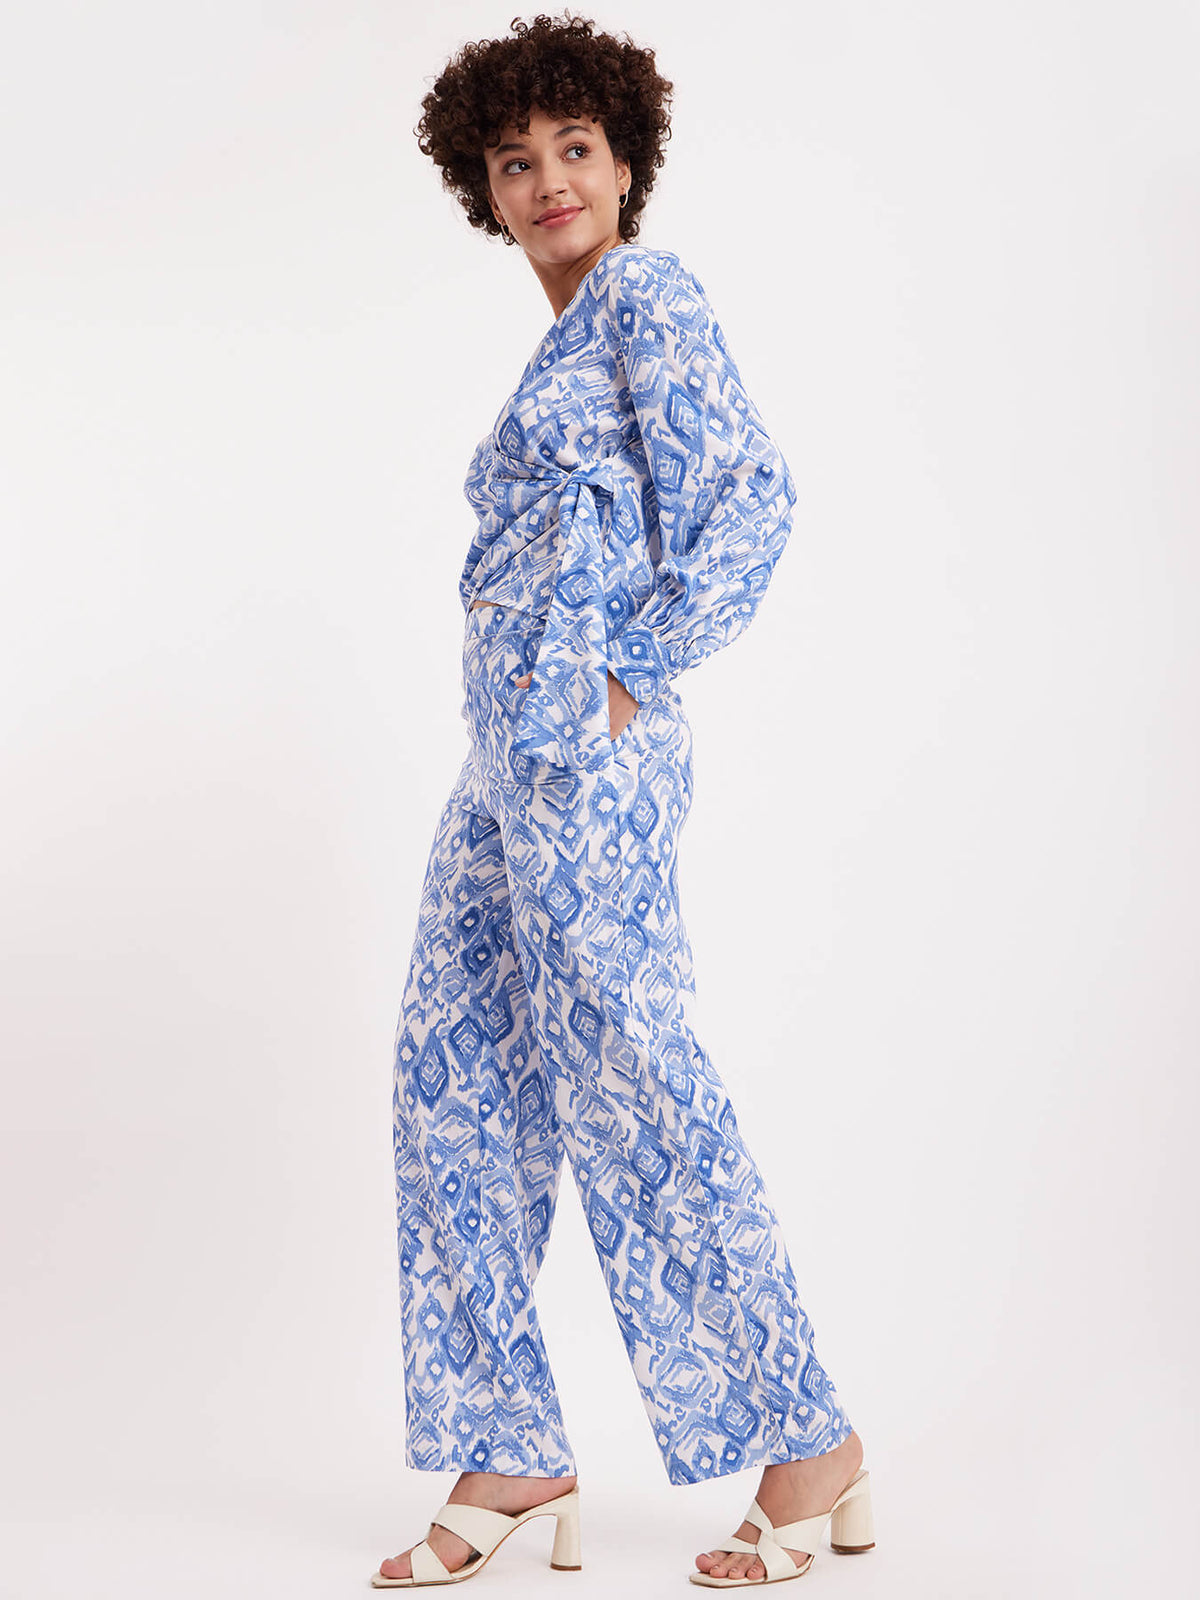 Wrap Top And Trouser Co-ord - White And Blue